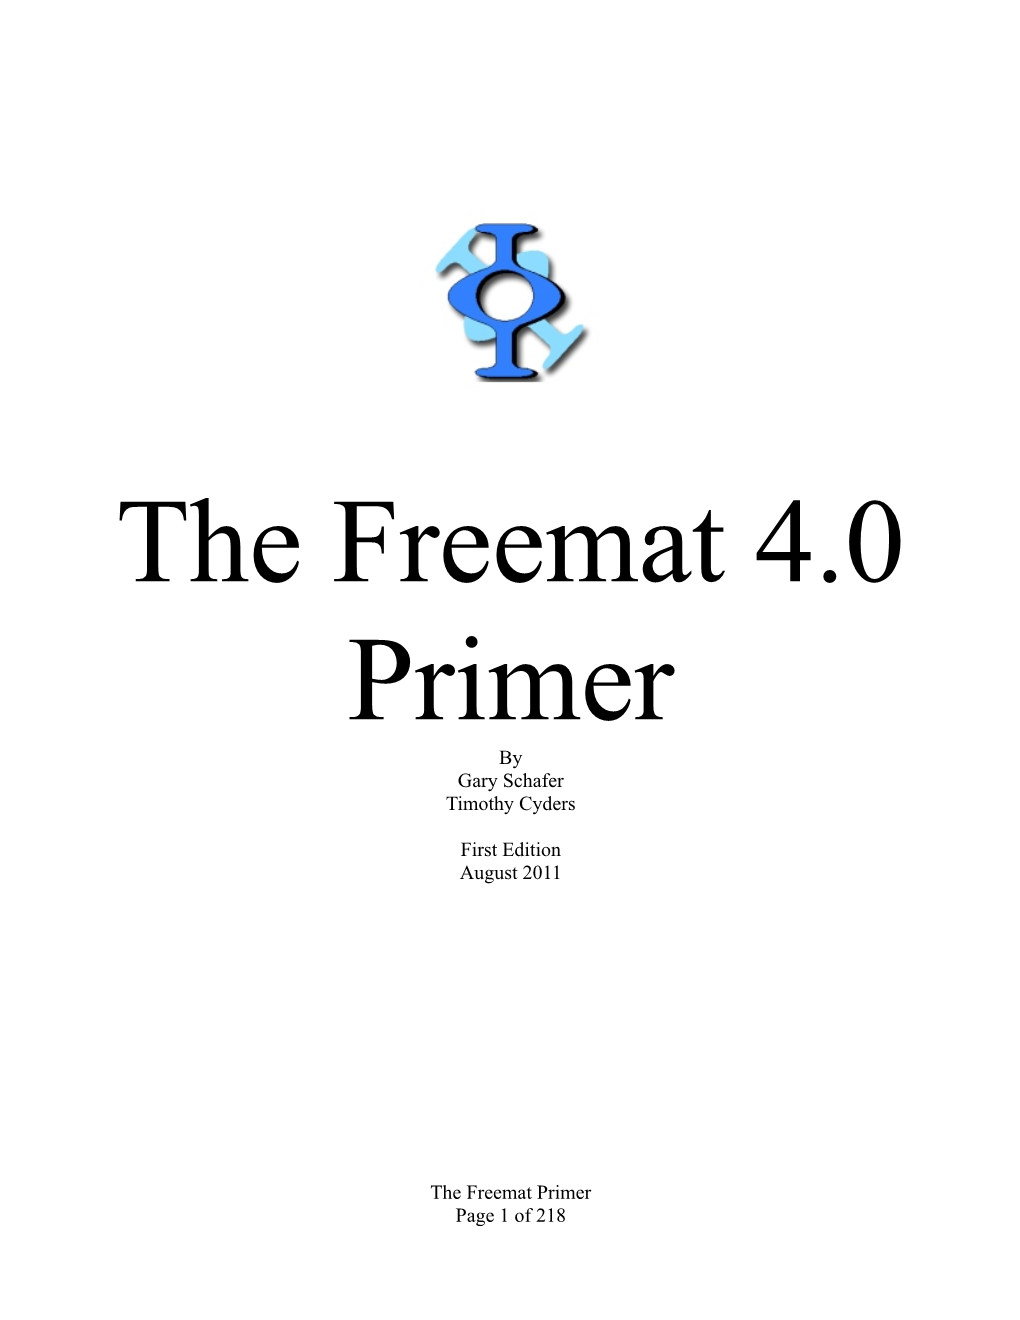 The Freemat Primer Page 1 of 218 Table of Contents About the Authors